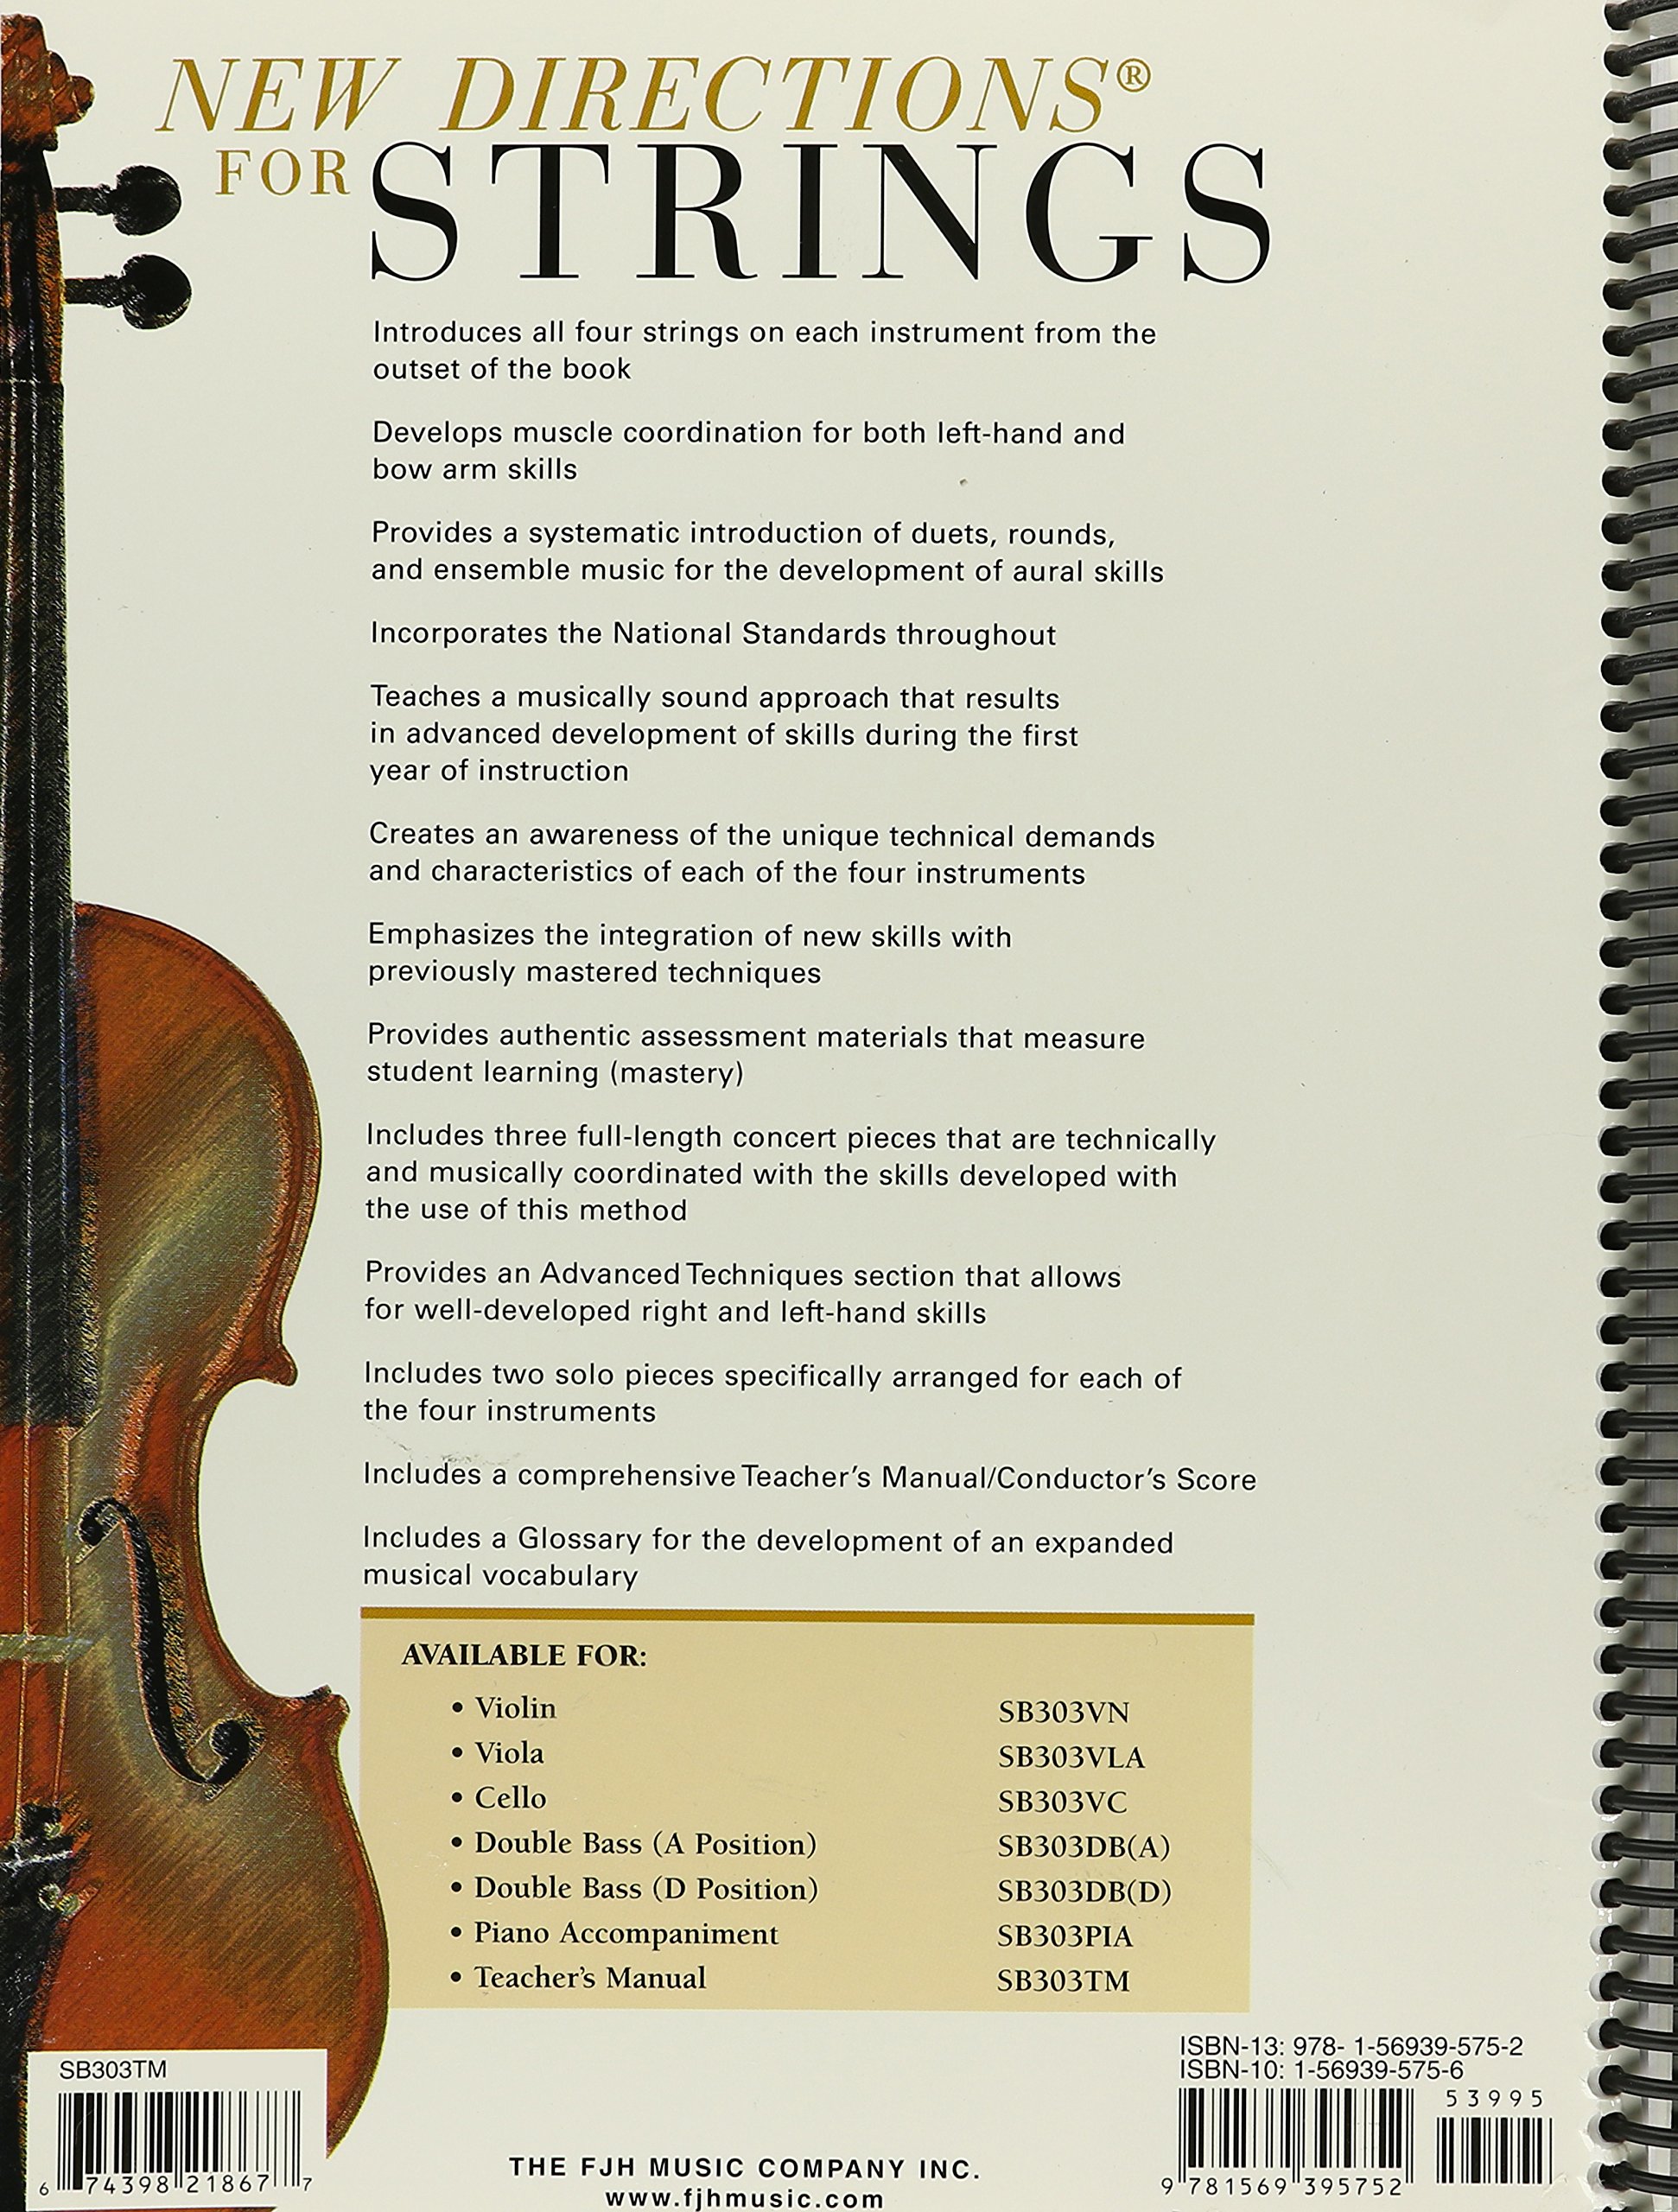 New Directions for Strings Teacher's Manual Book 1 (New Directions for Strings, 1)